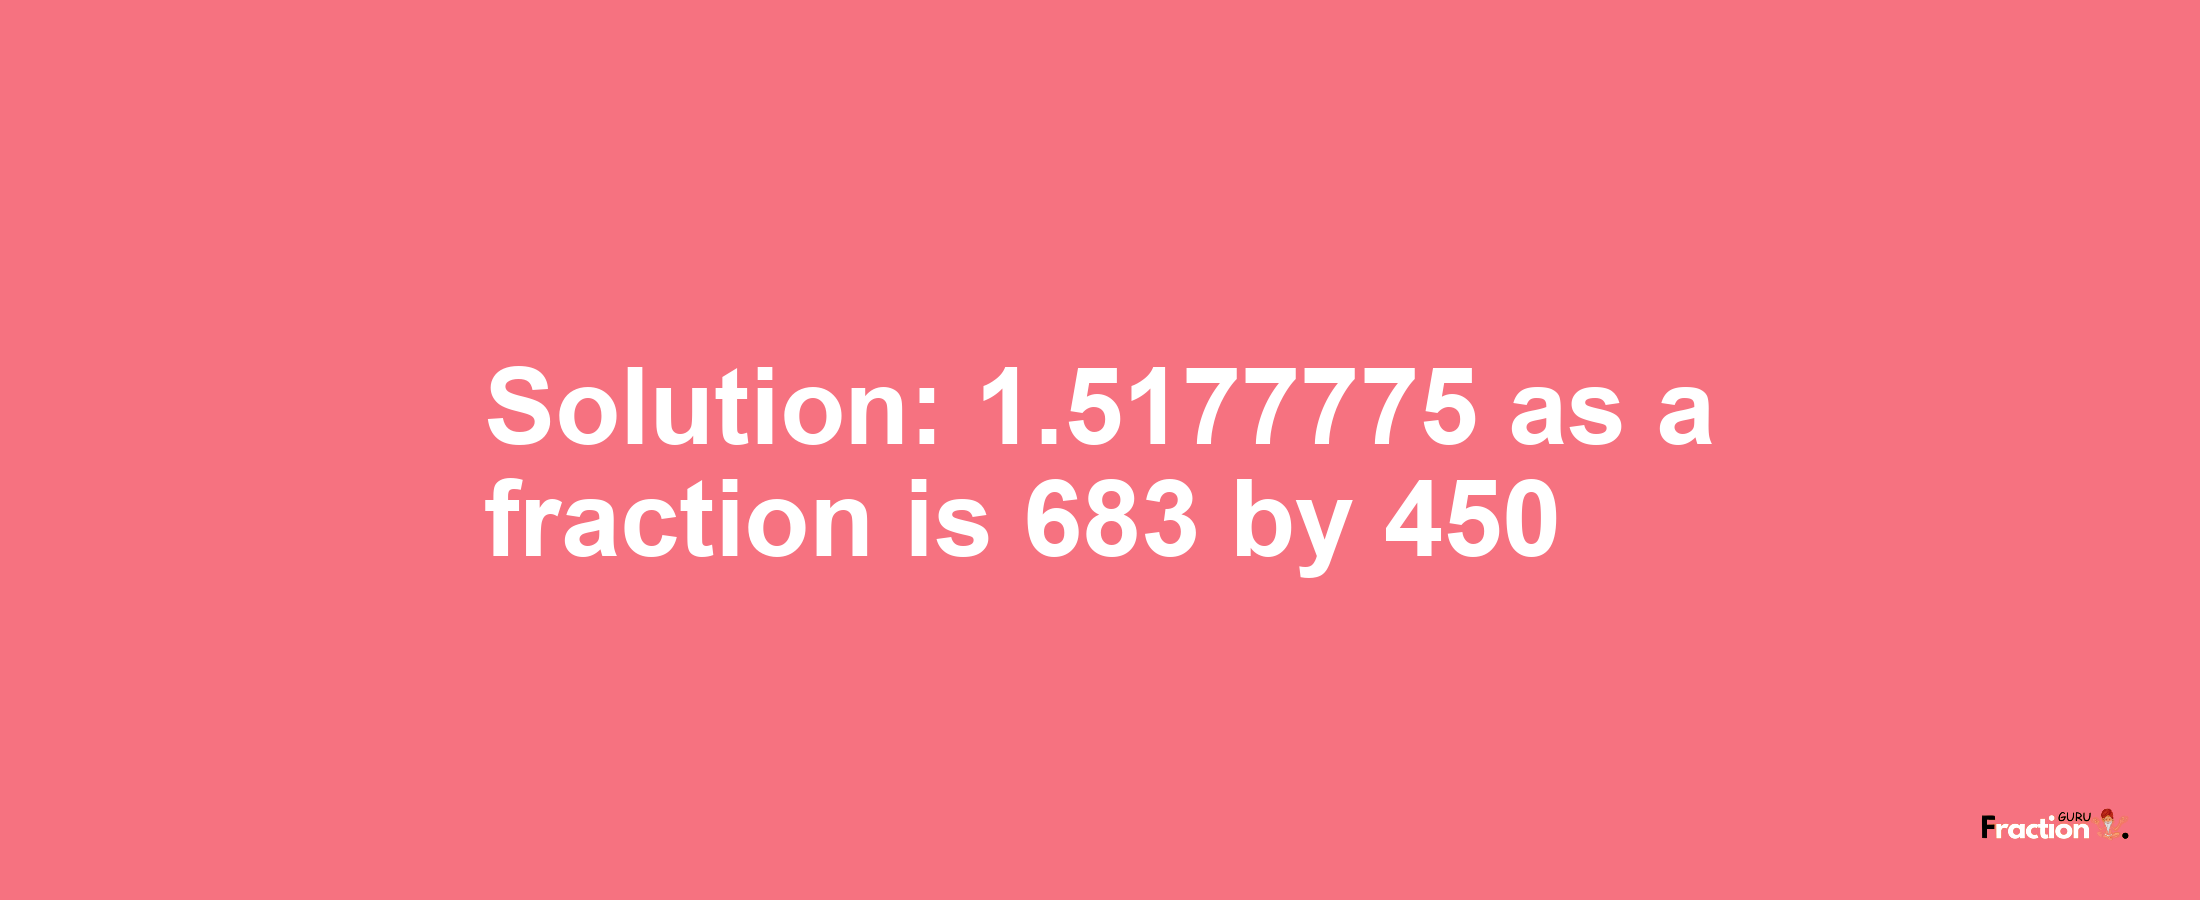 Solution:1.5177775 as a fraction is 683/450